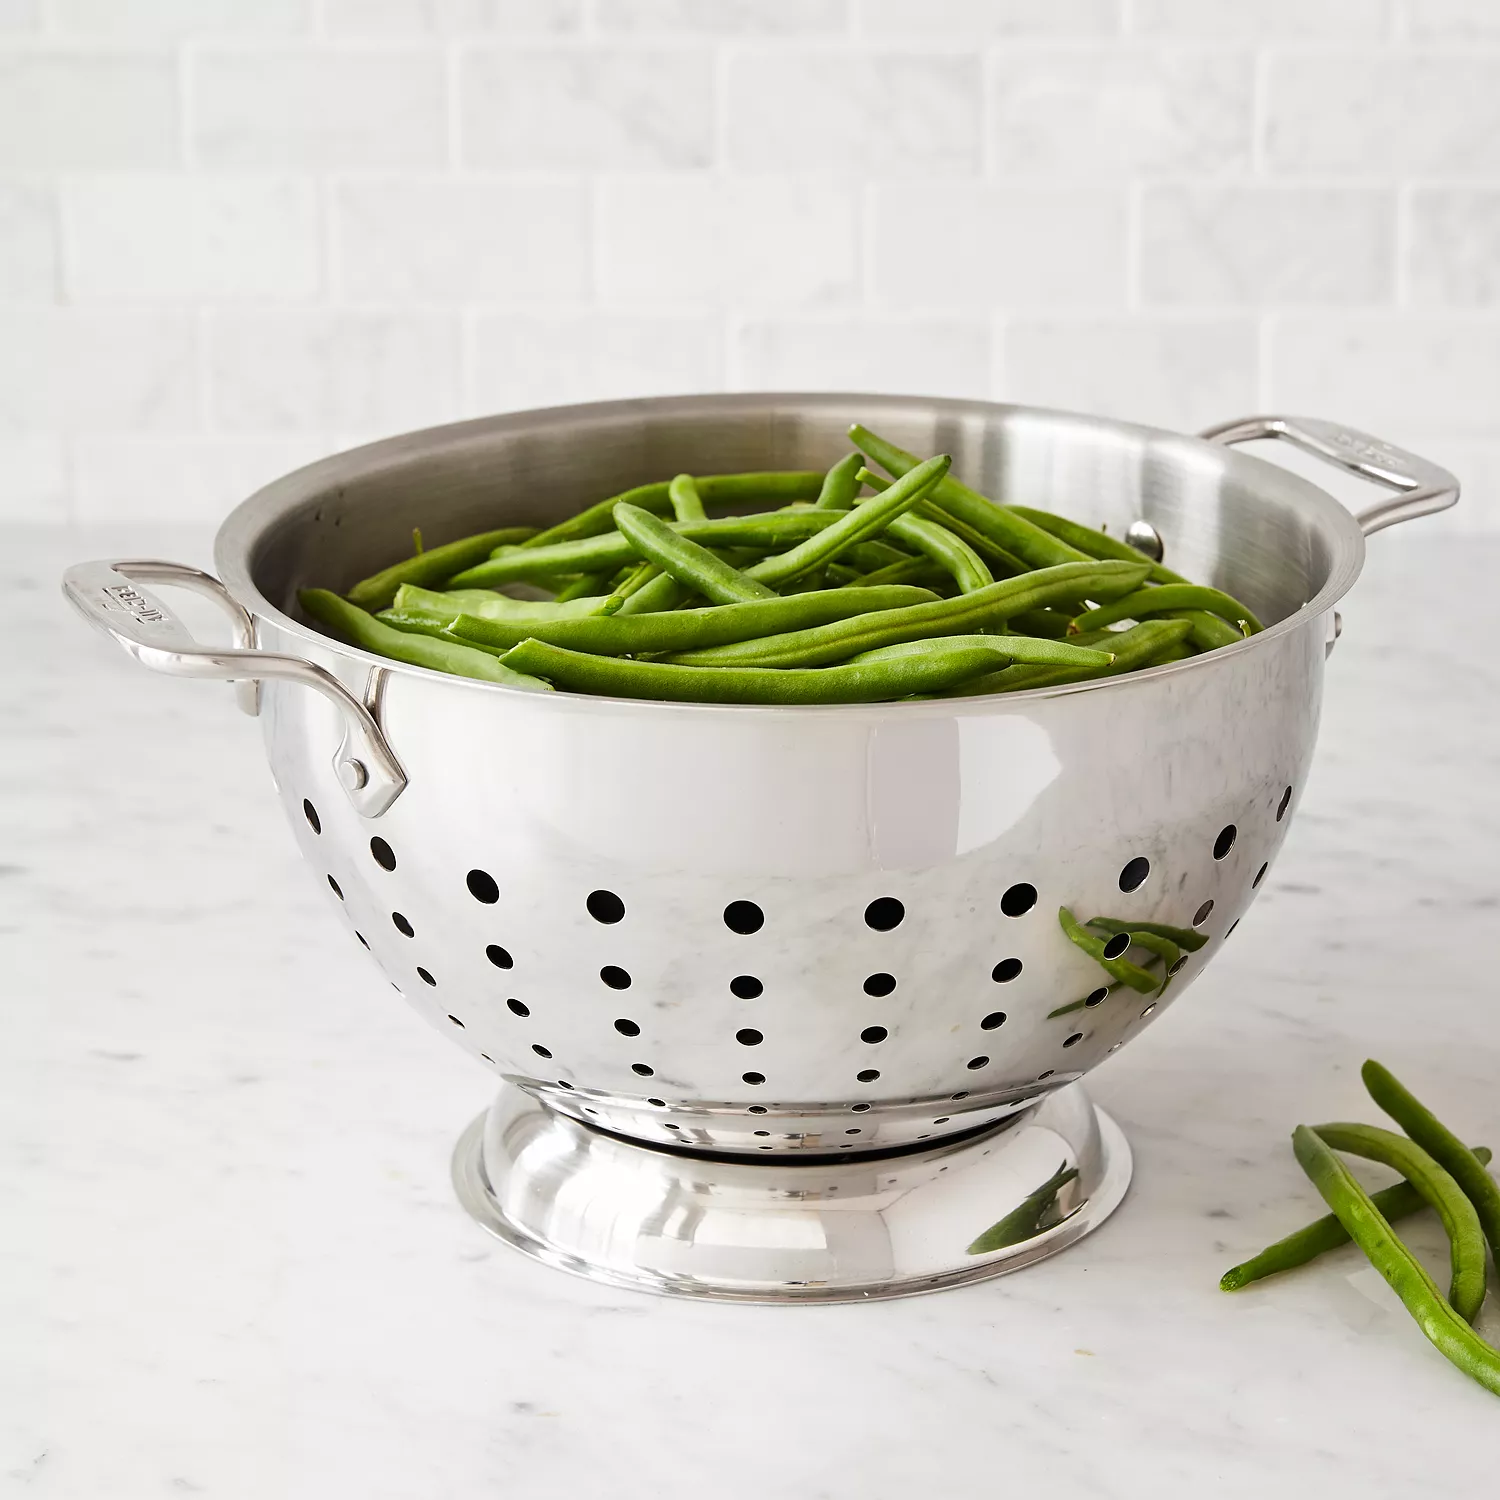 All-Clad 5-Qt. Stainless Steel Colander + Reviews